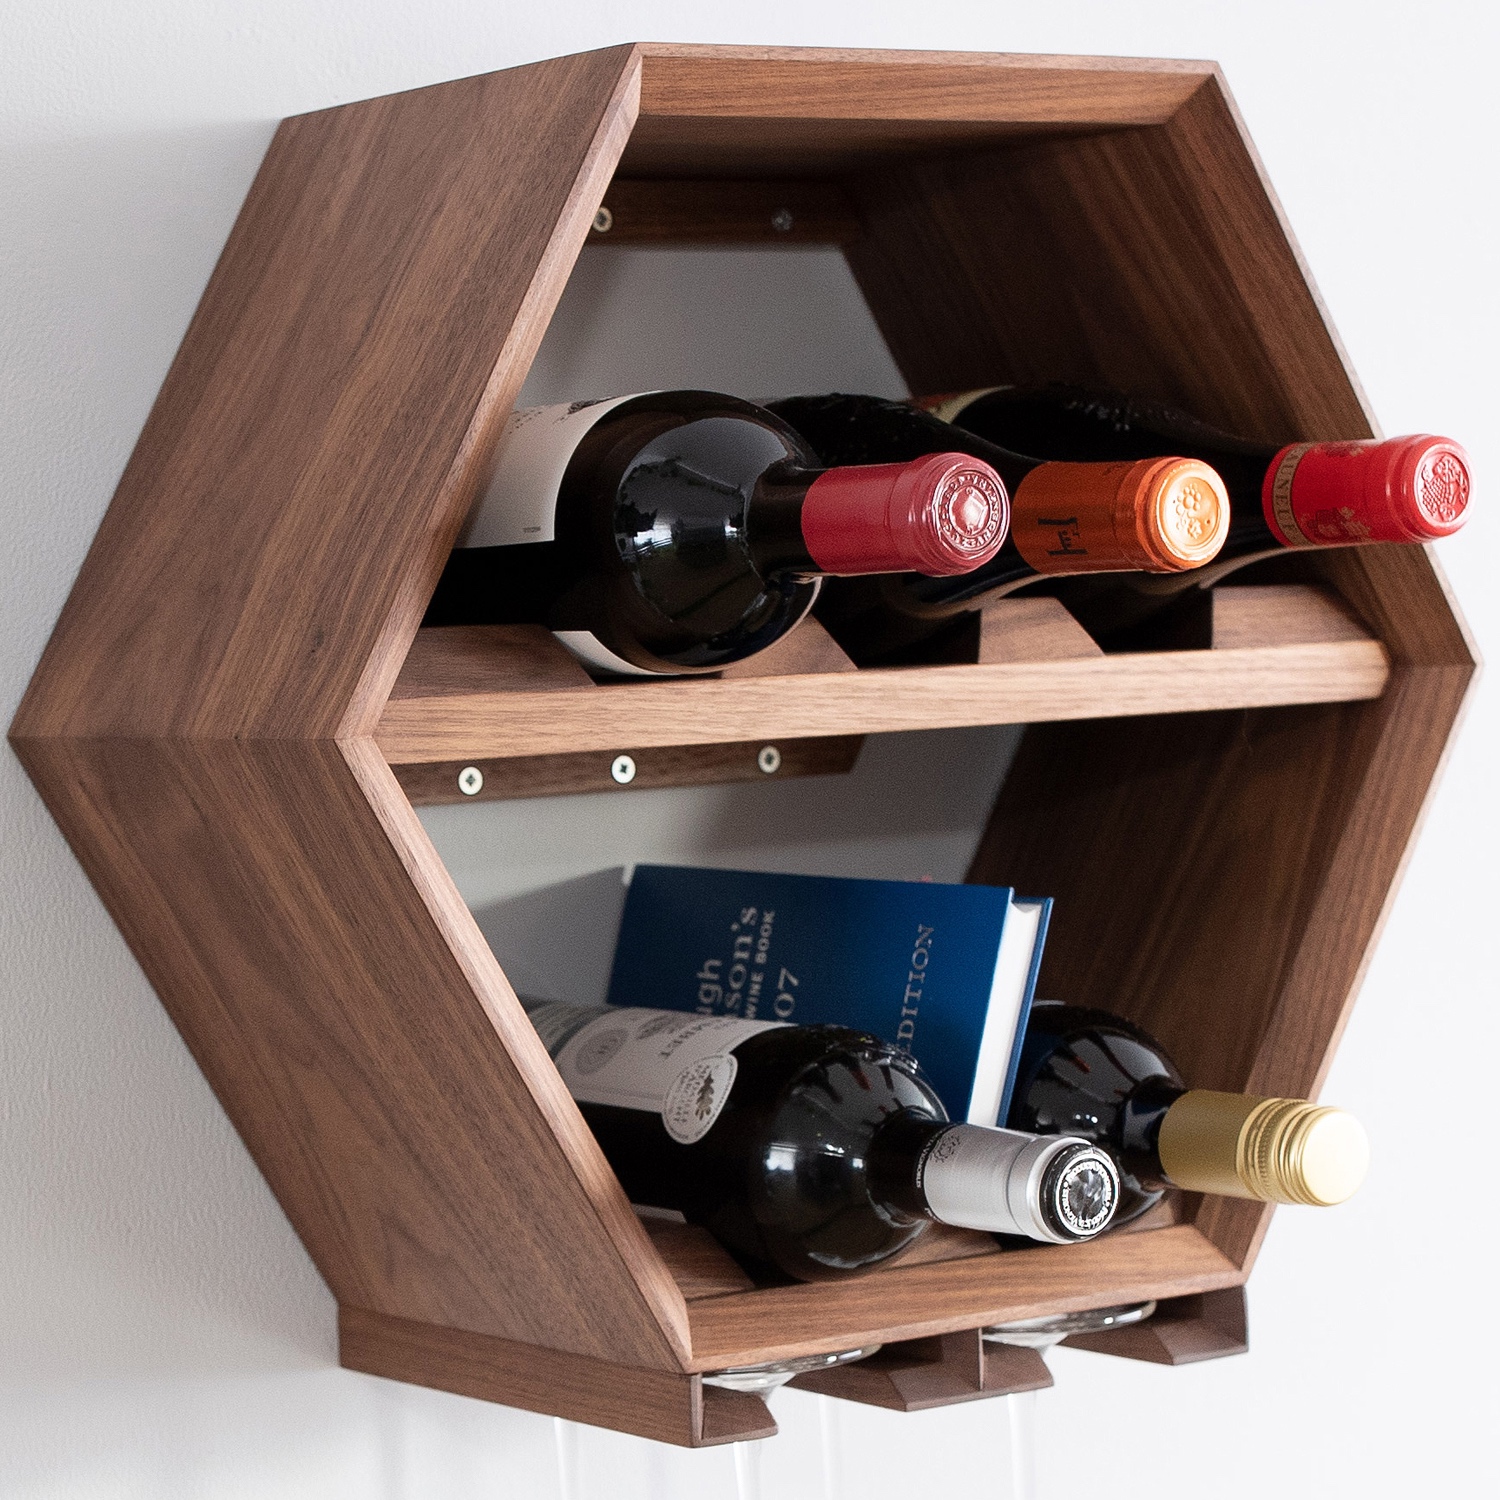 Hexagon shaped wine rack made in solid walnut wood.  Holding 5 bottles of wine. 